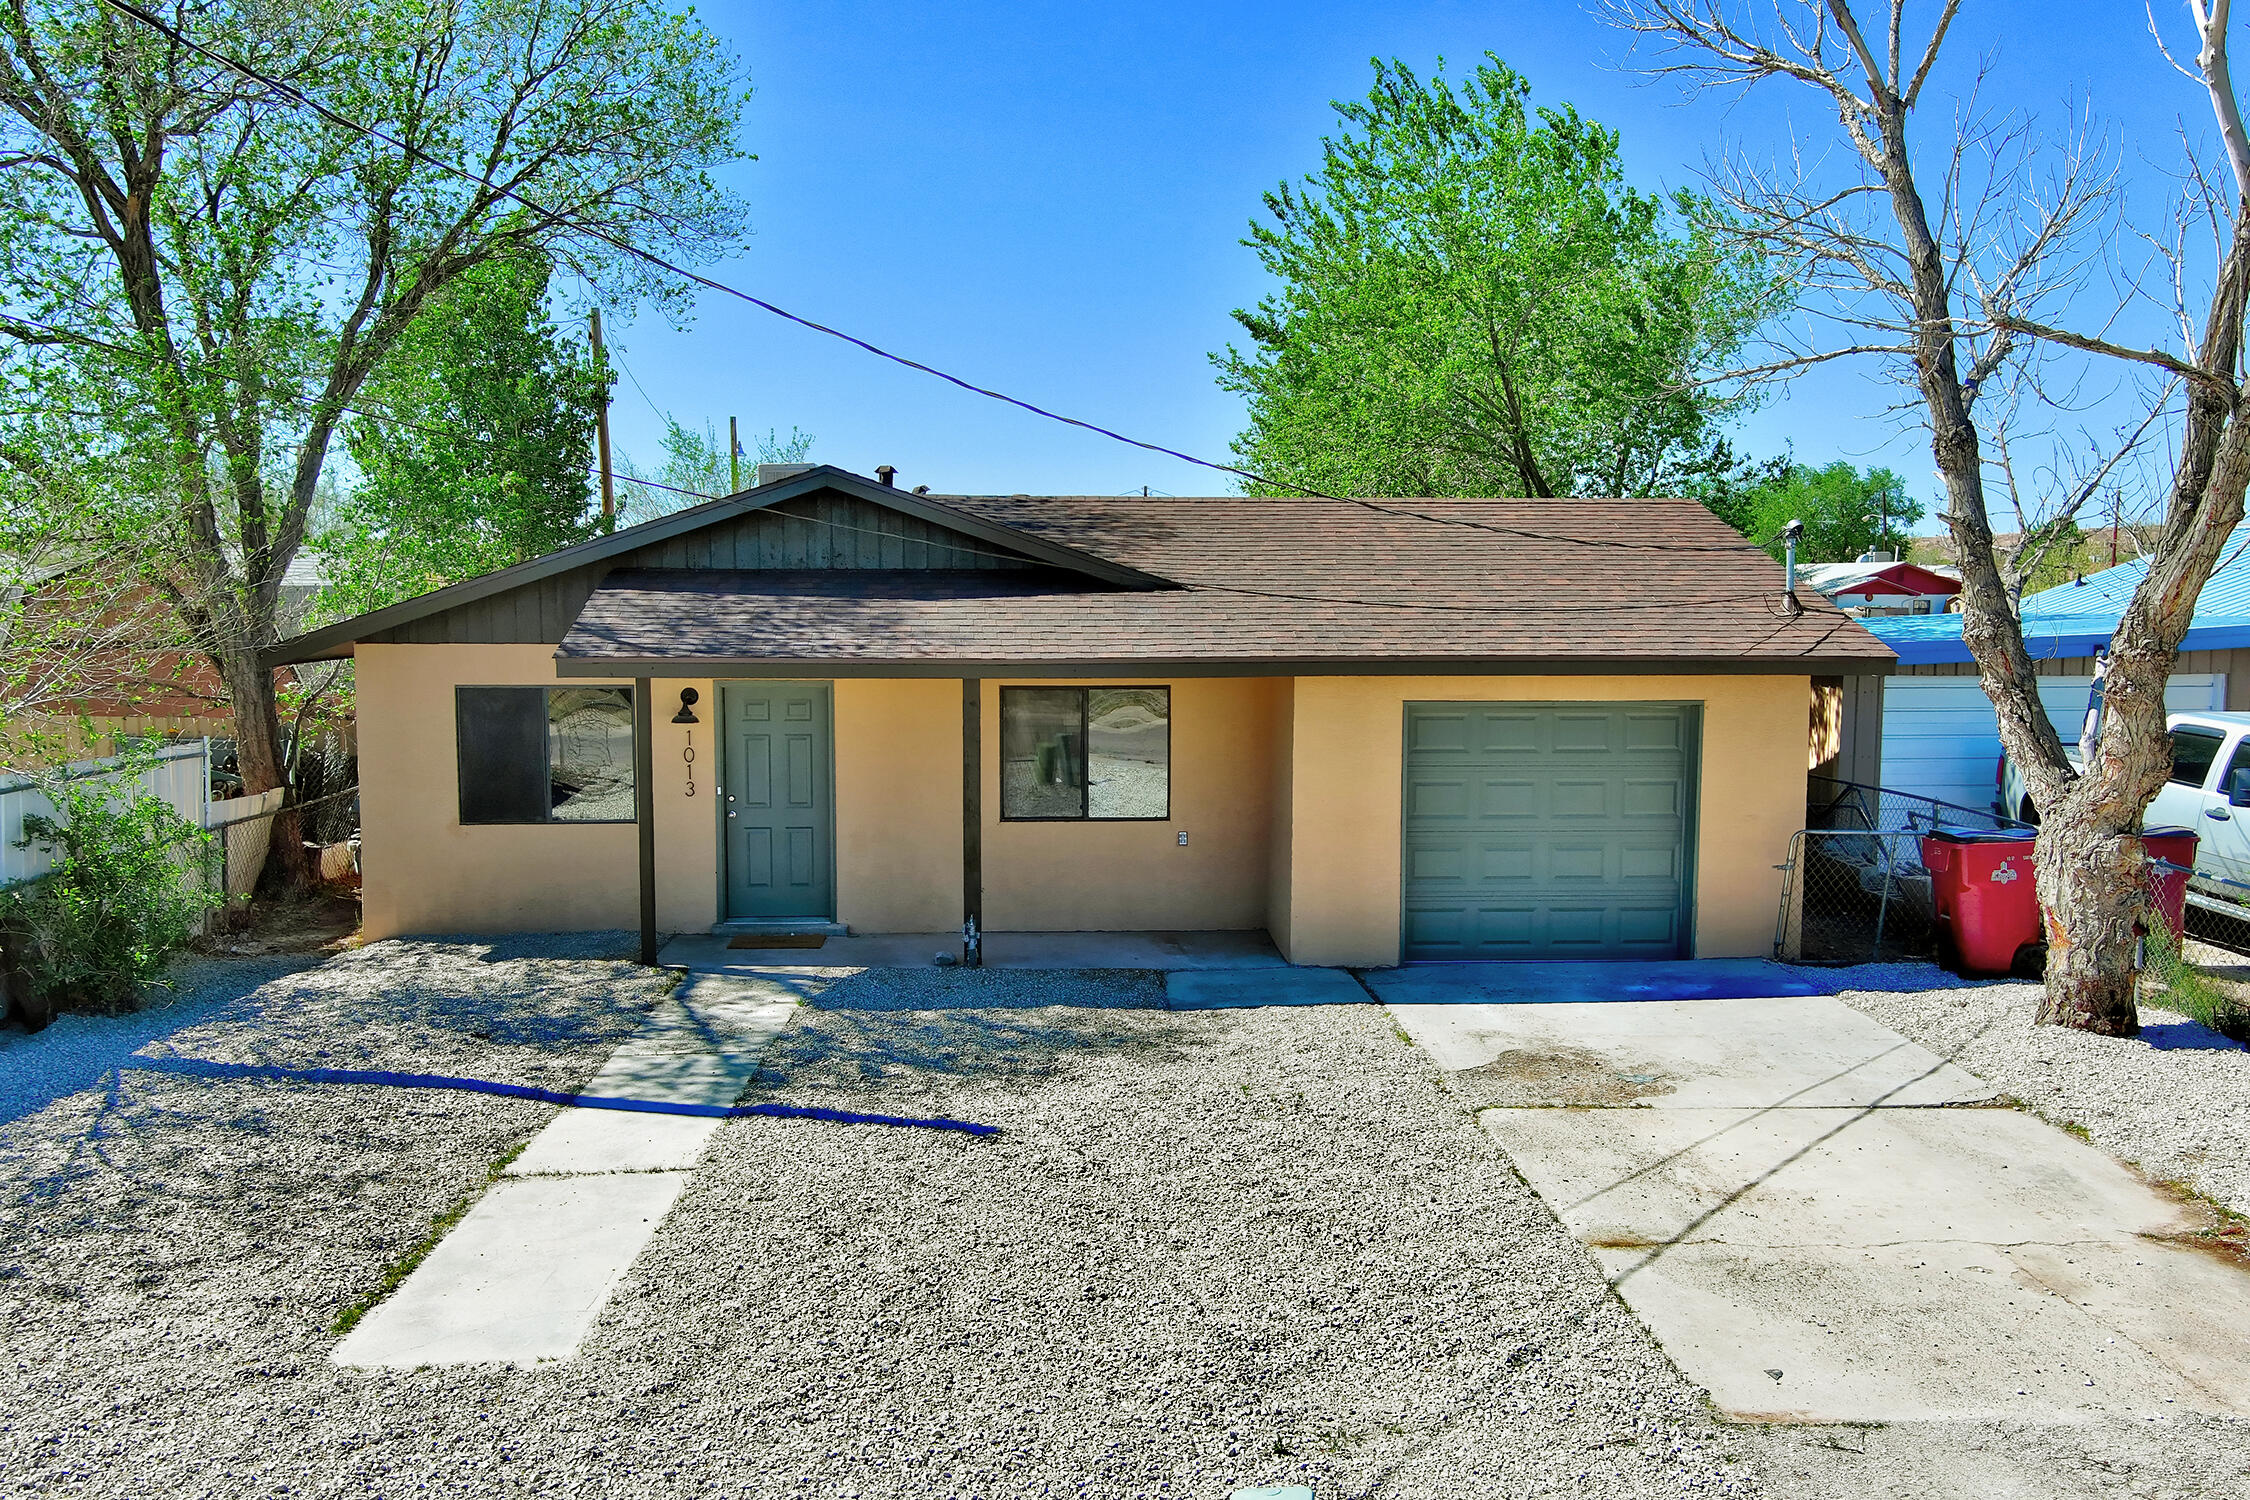 1013 W Picard Avenue, Belen, New Mexico 87002, 3 Bedrooms Bedrooms, ,1 BathroomBathrooms,Residential,For Sale,1013 W Picard Avenue,1061028